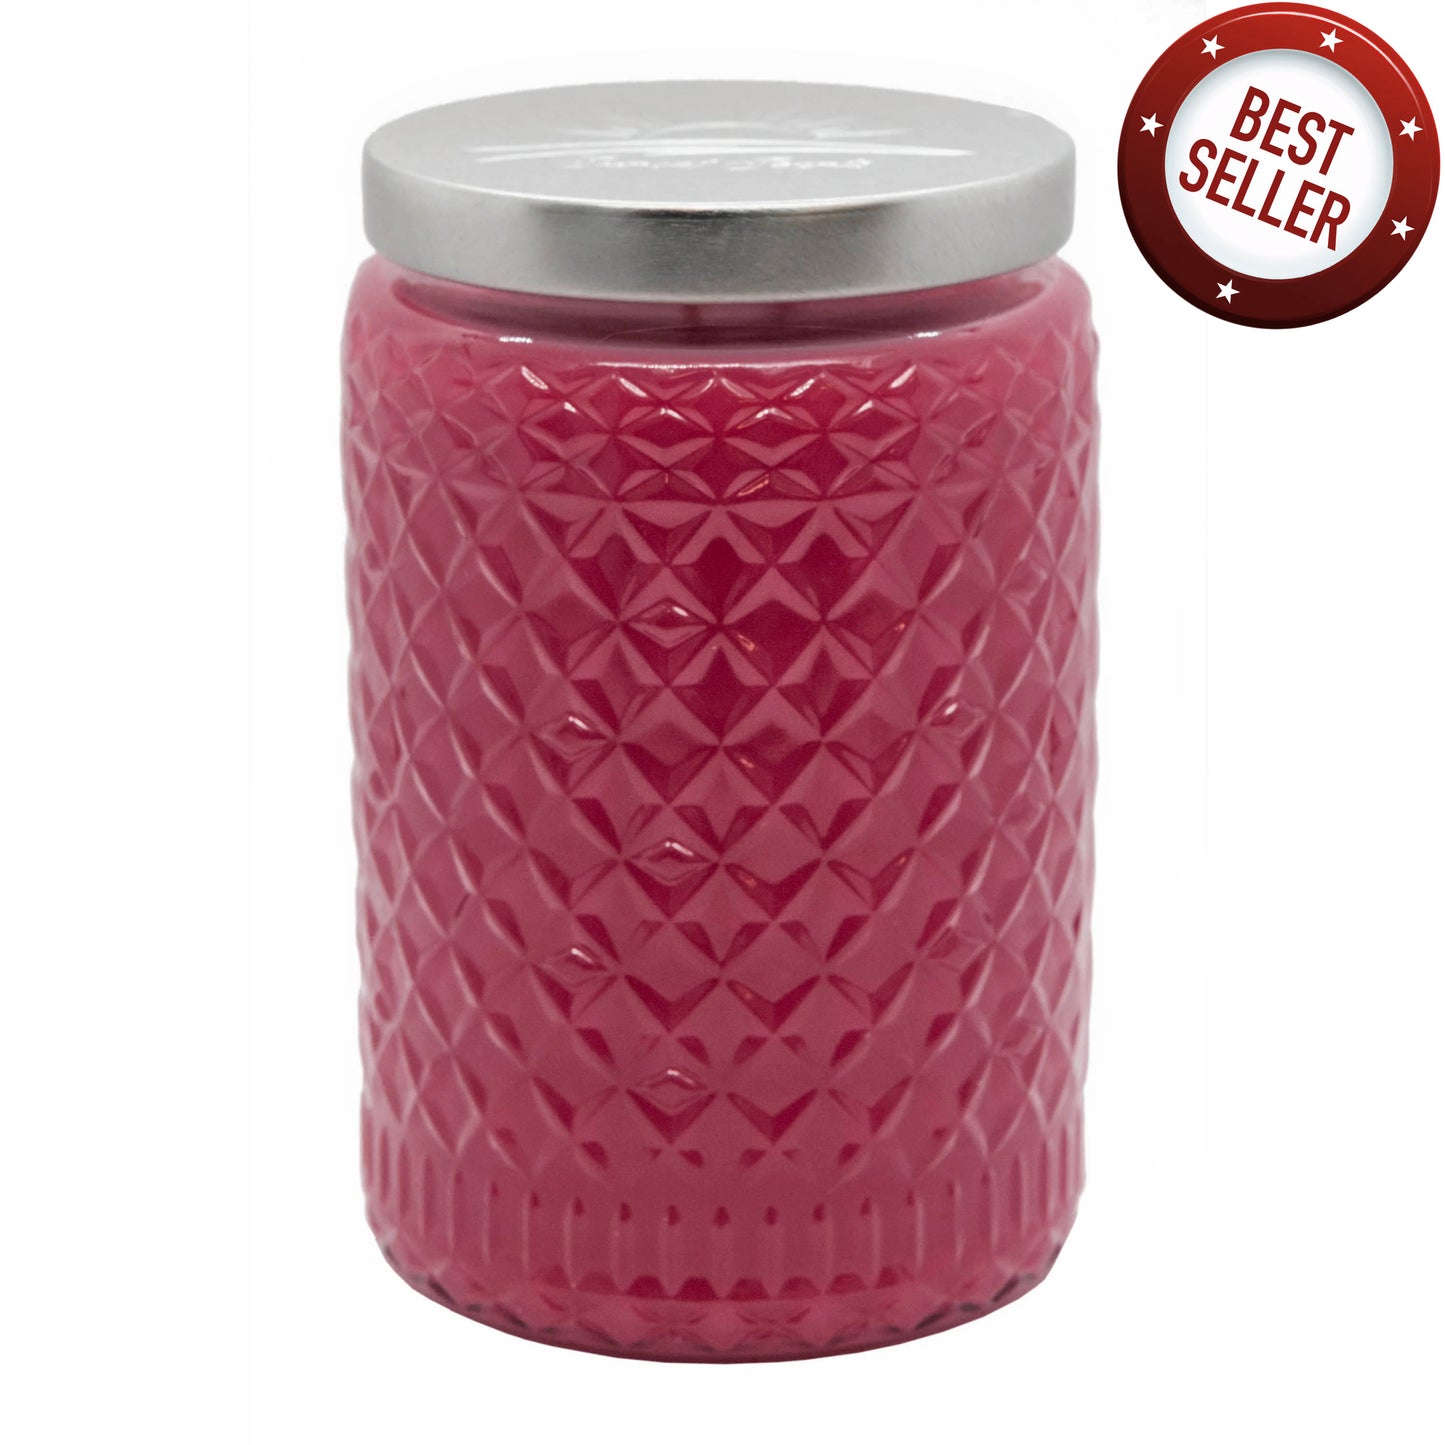 Pomegranate Scented Candle 24oz